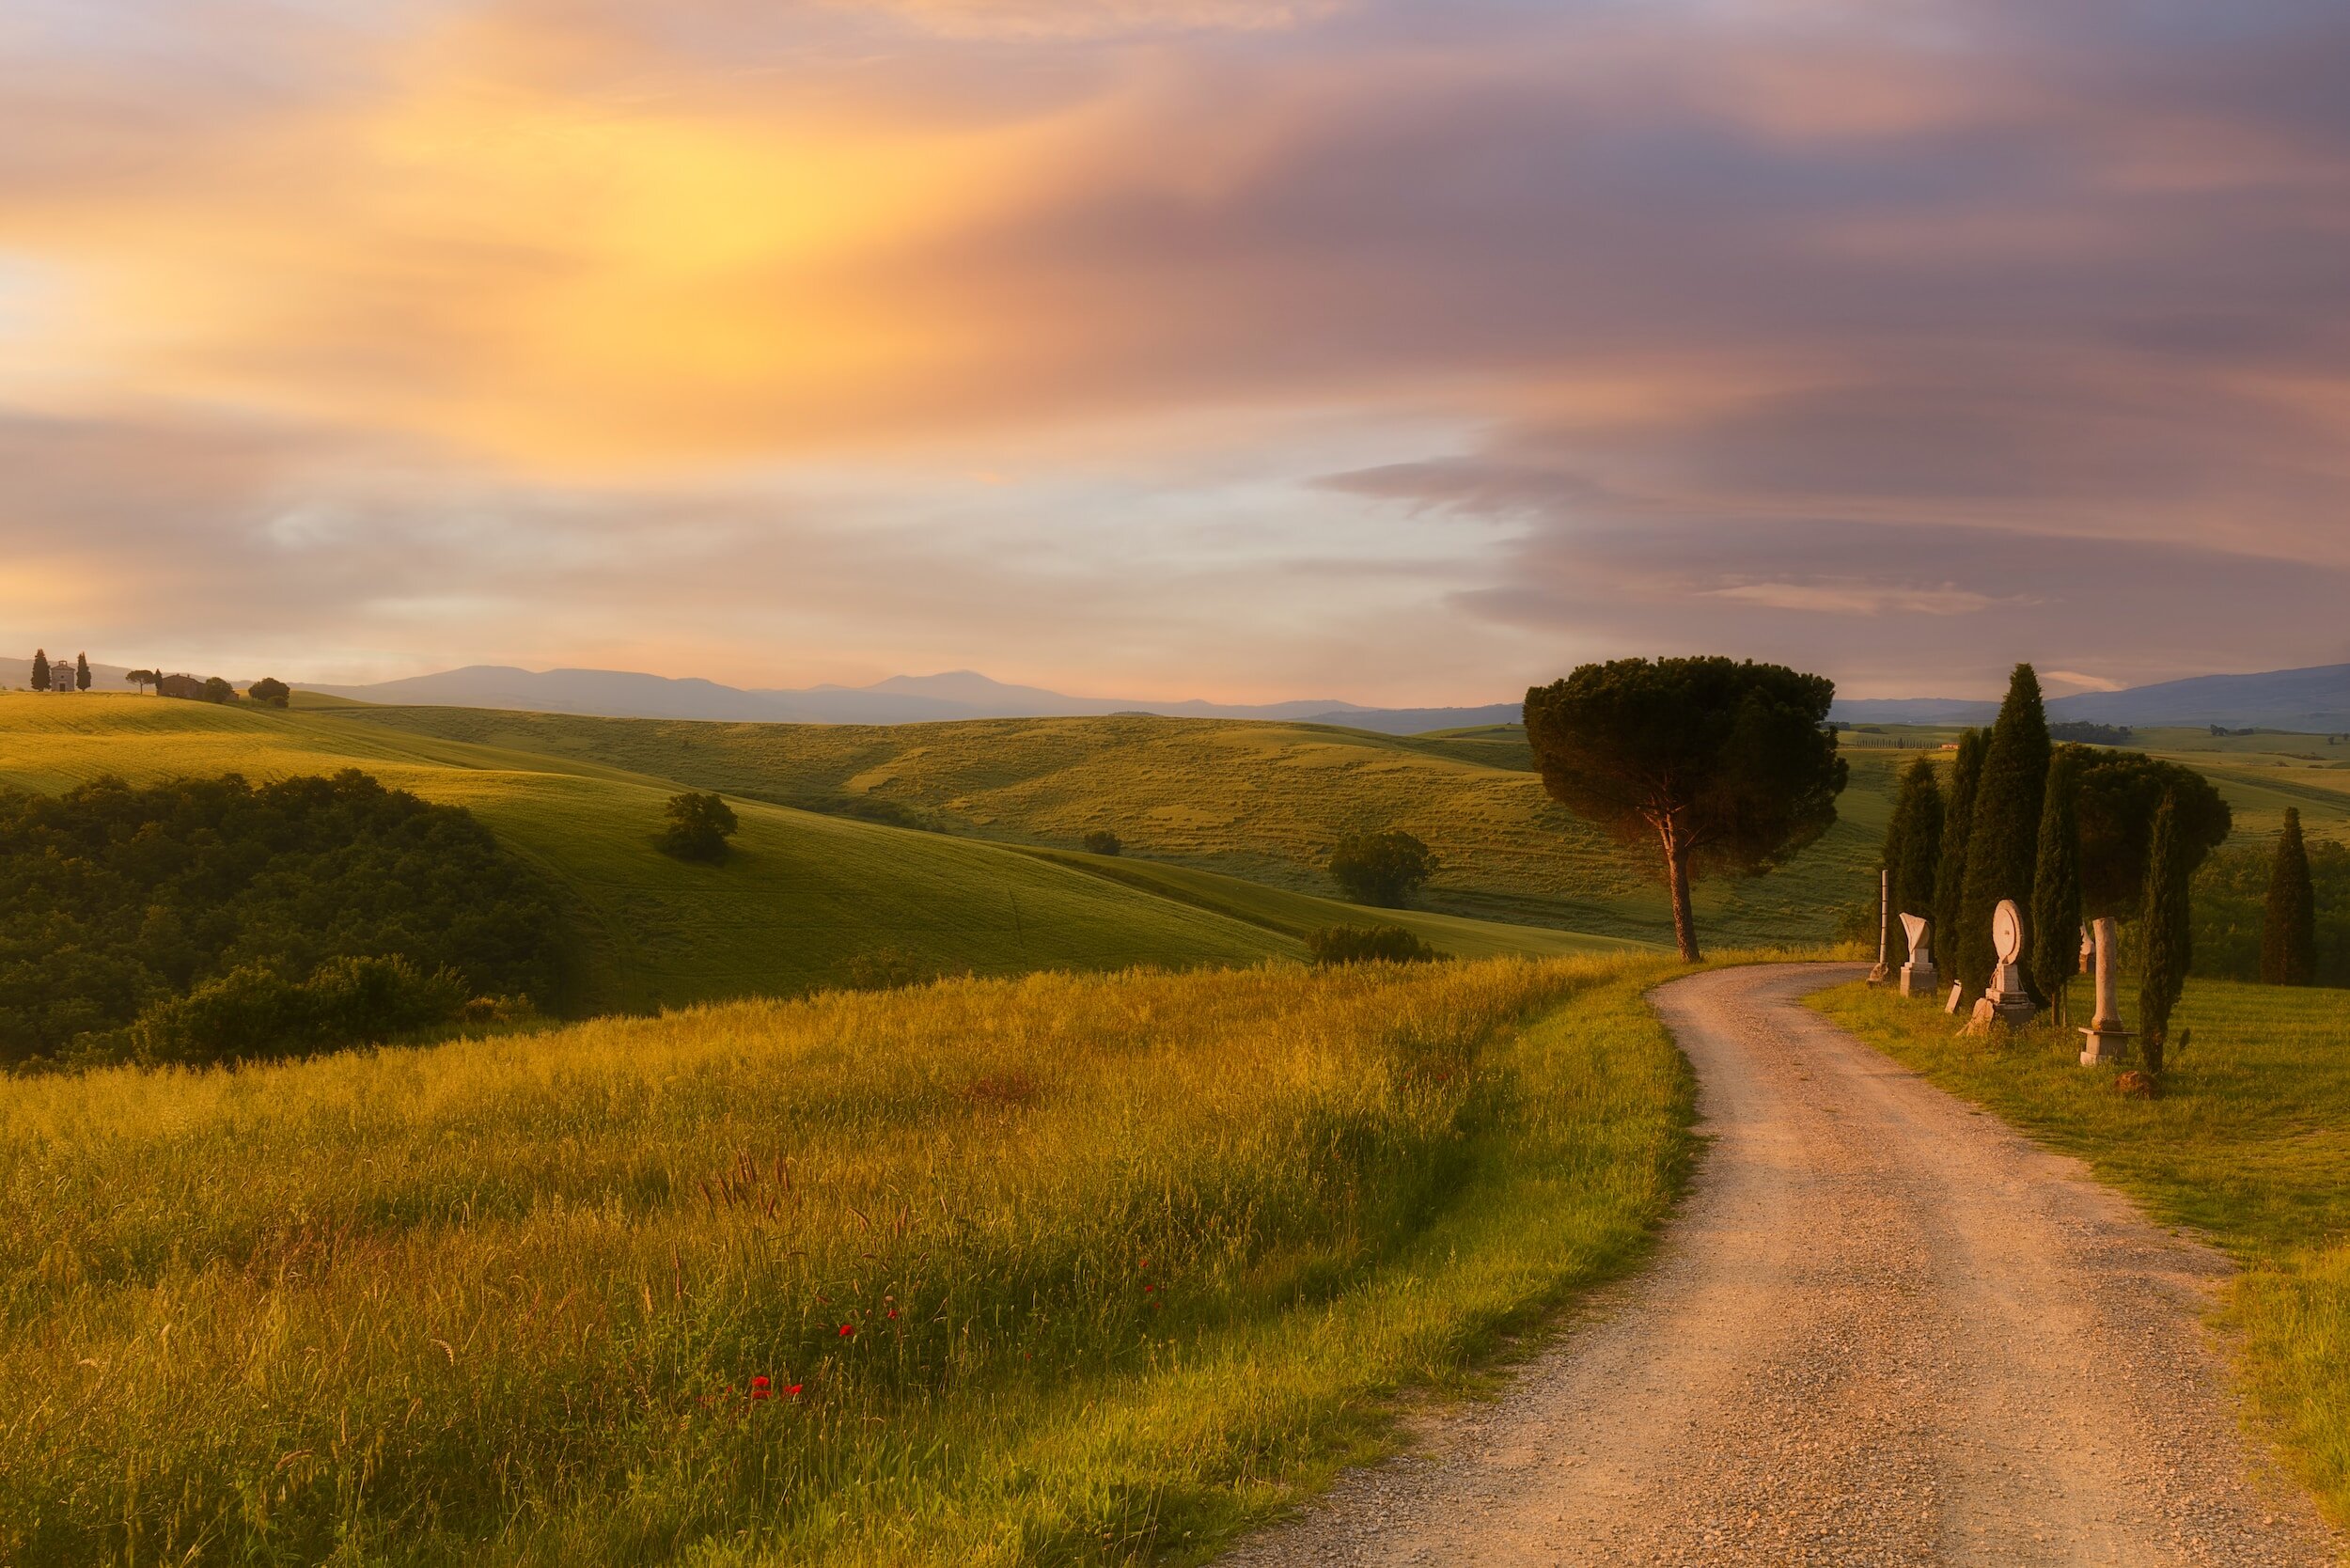 Bucolic countryside in the Val d'Orcia region of Tuscany, with a dirt road winding through lush green fields